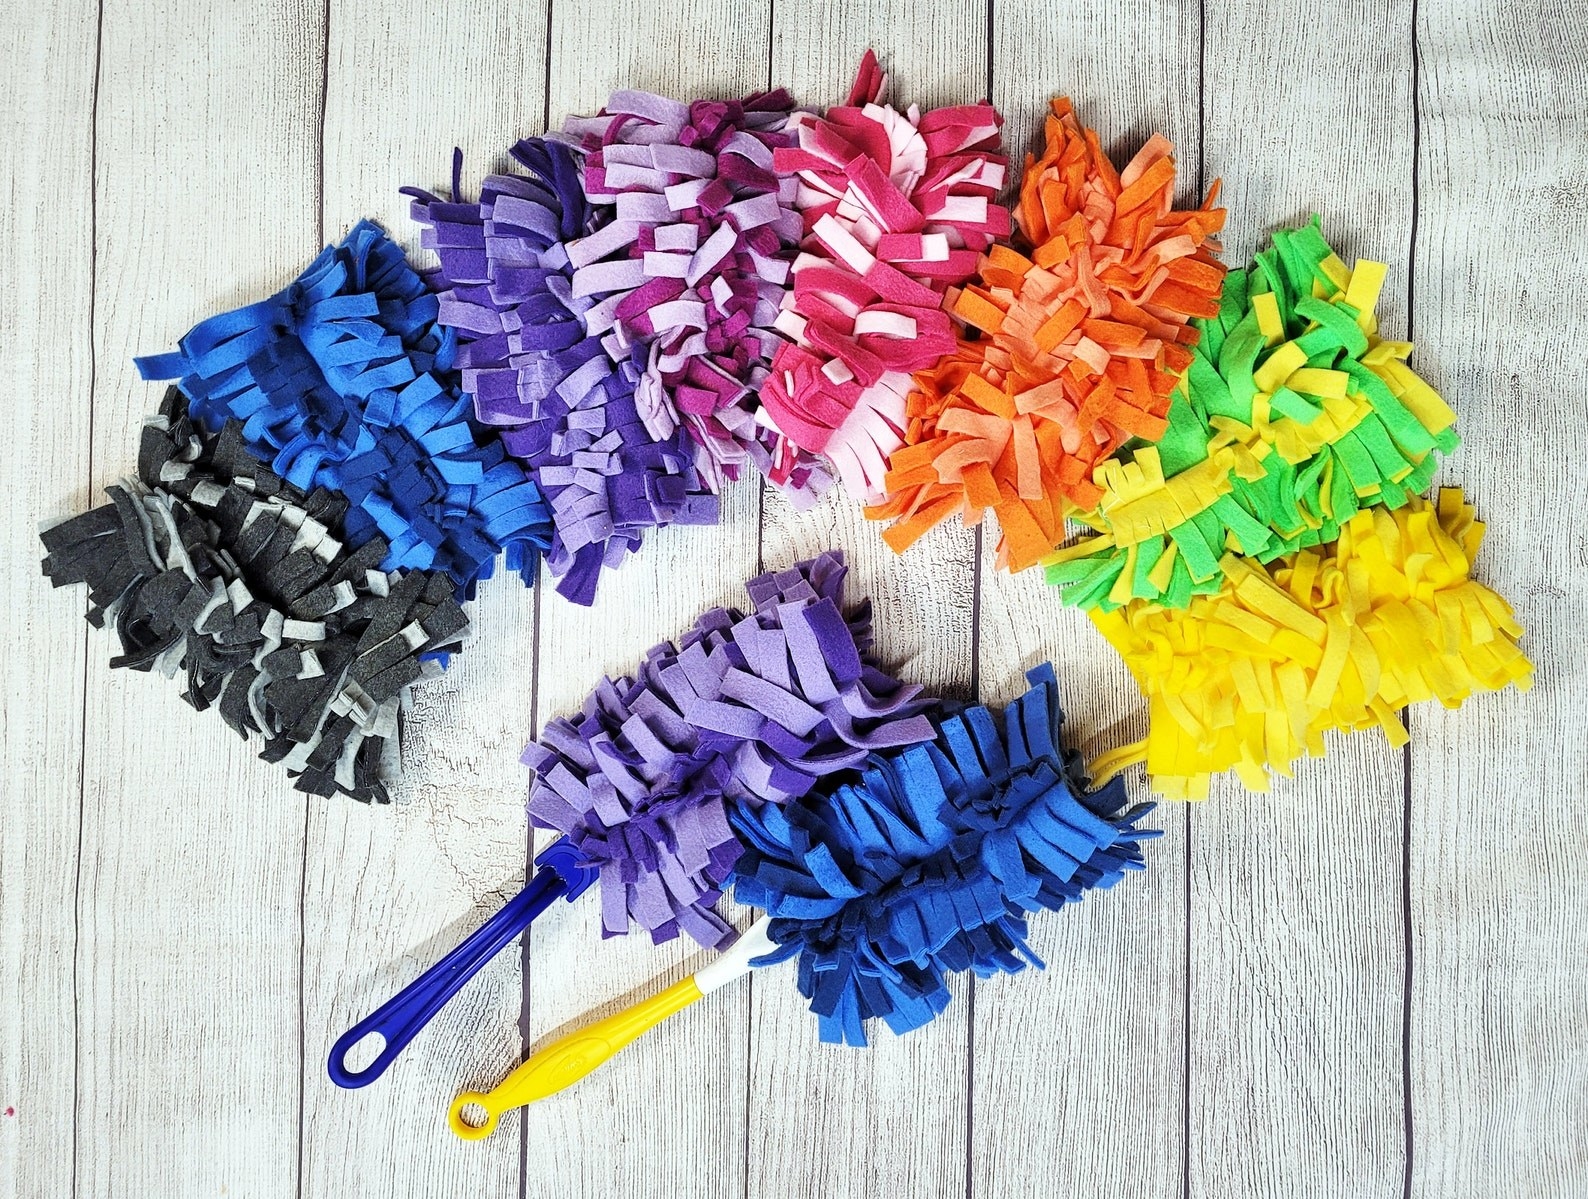 Colorful Swiffer style dusters on table